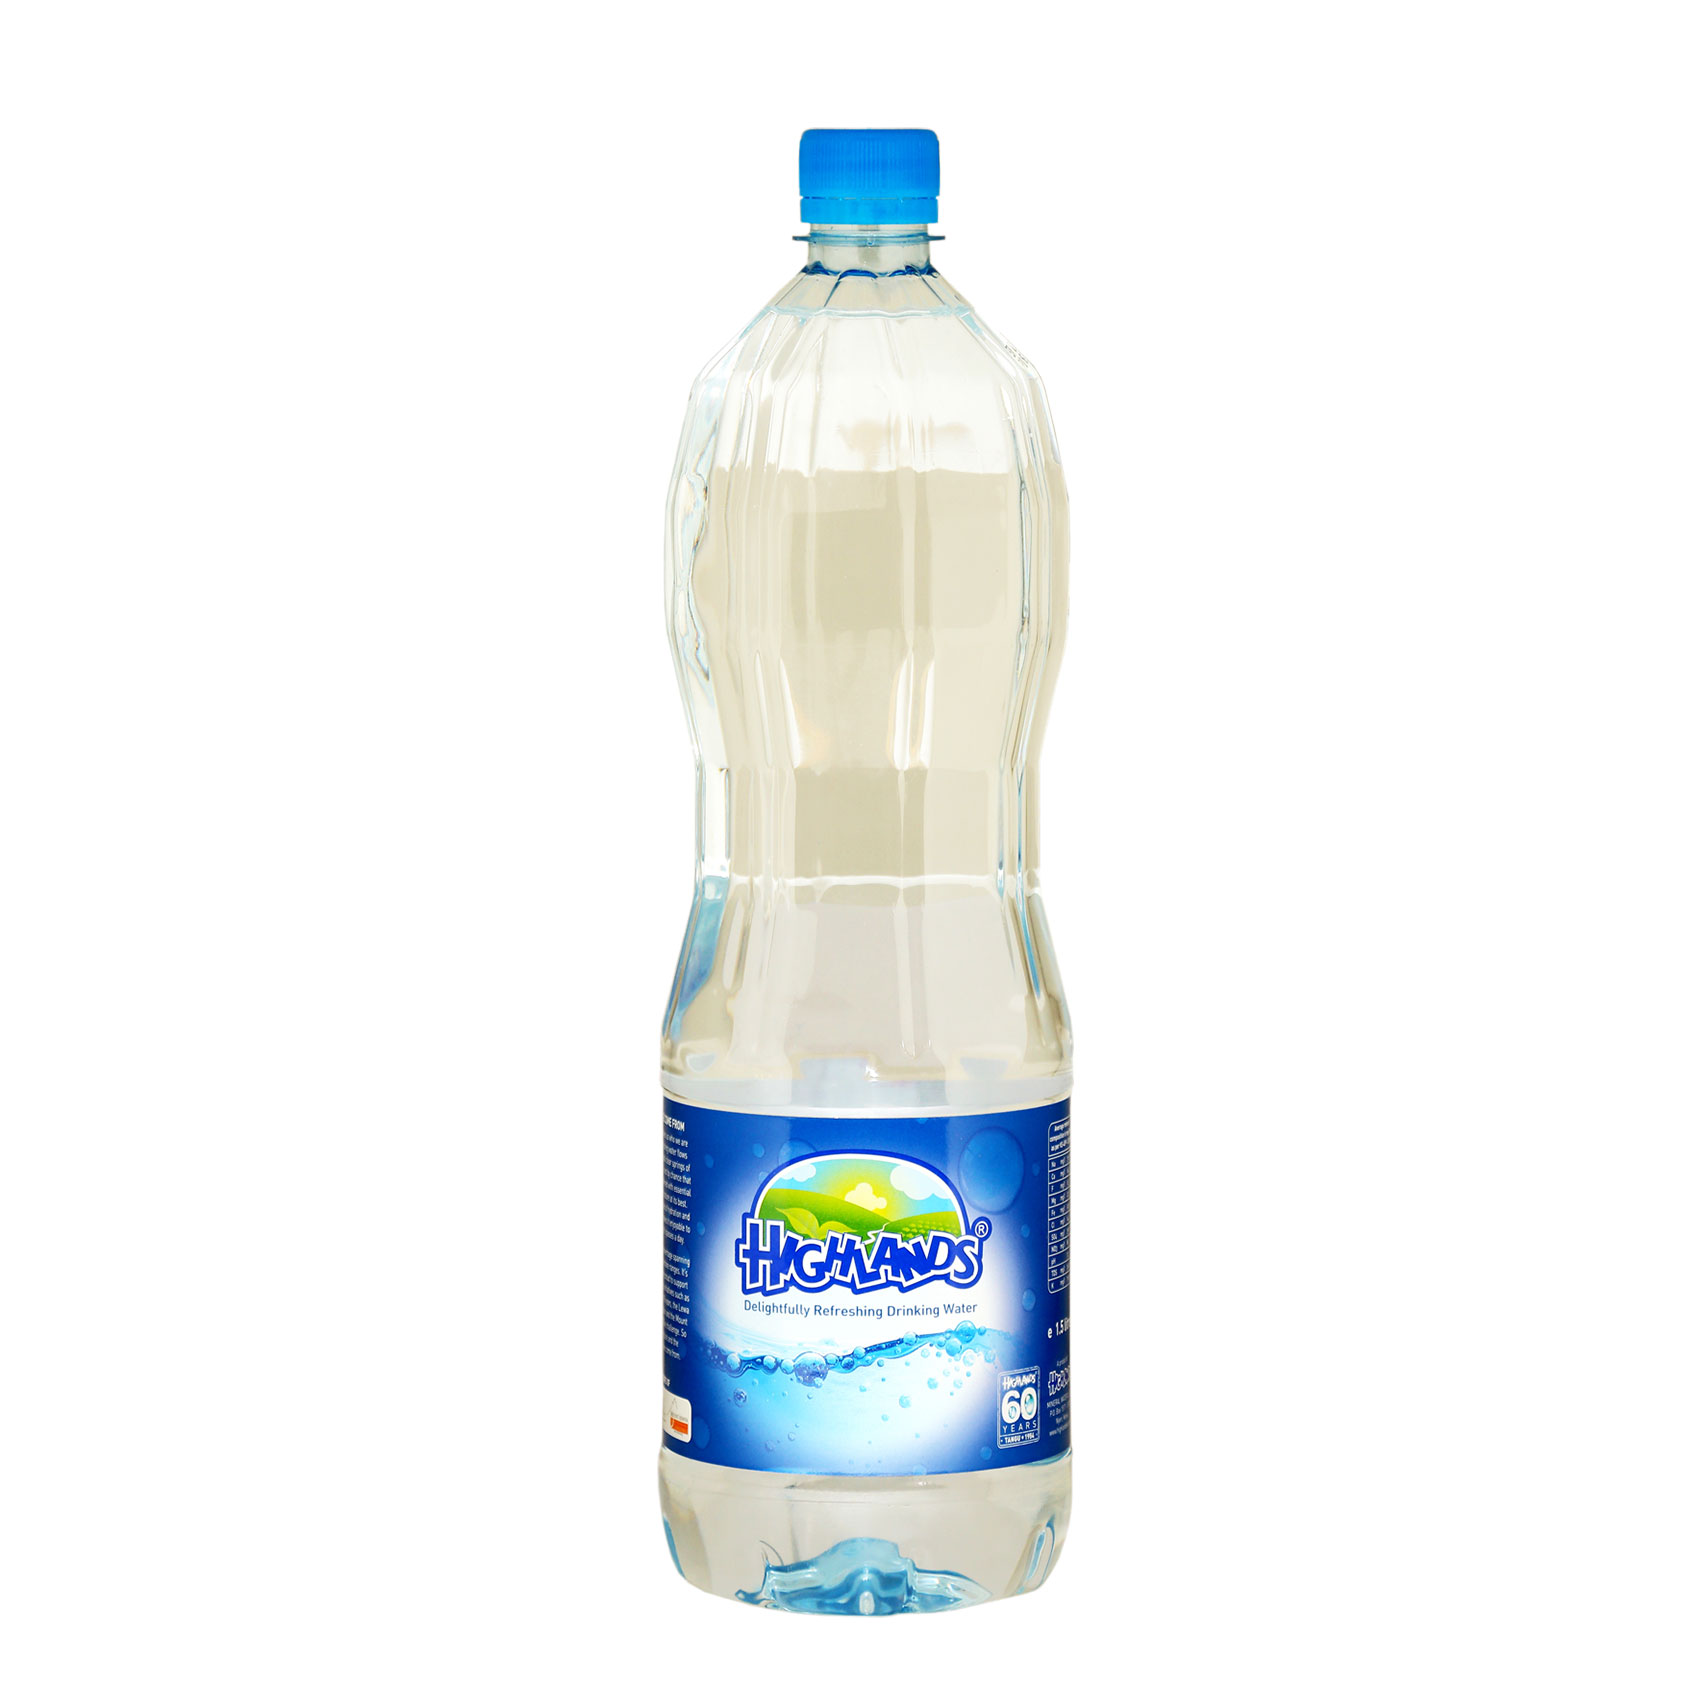 Highlands Drinking Water 1.5L